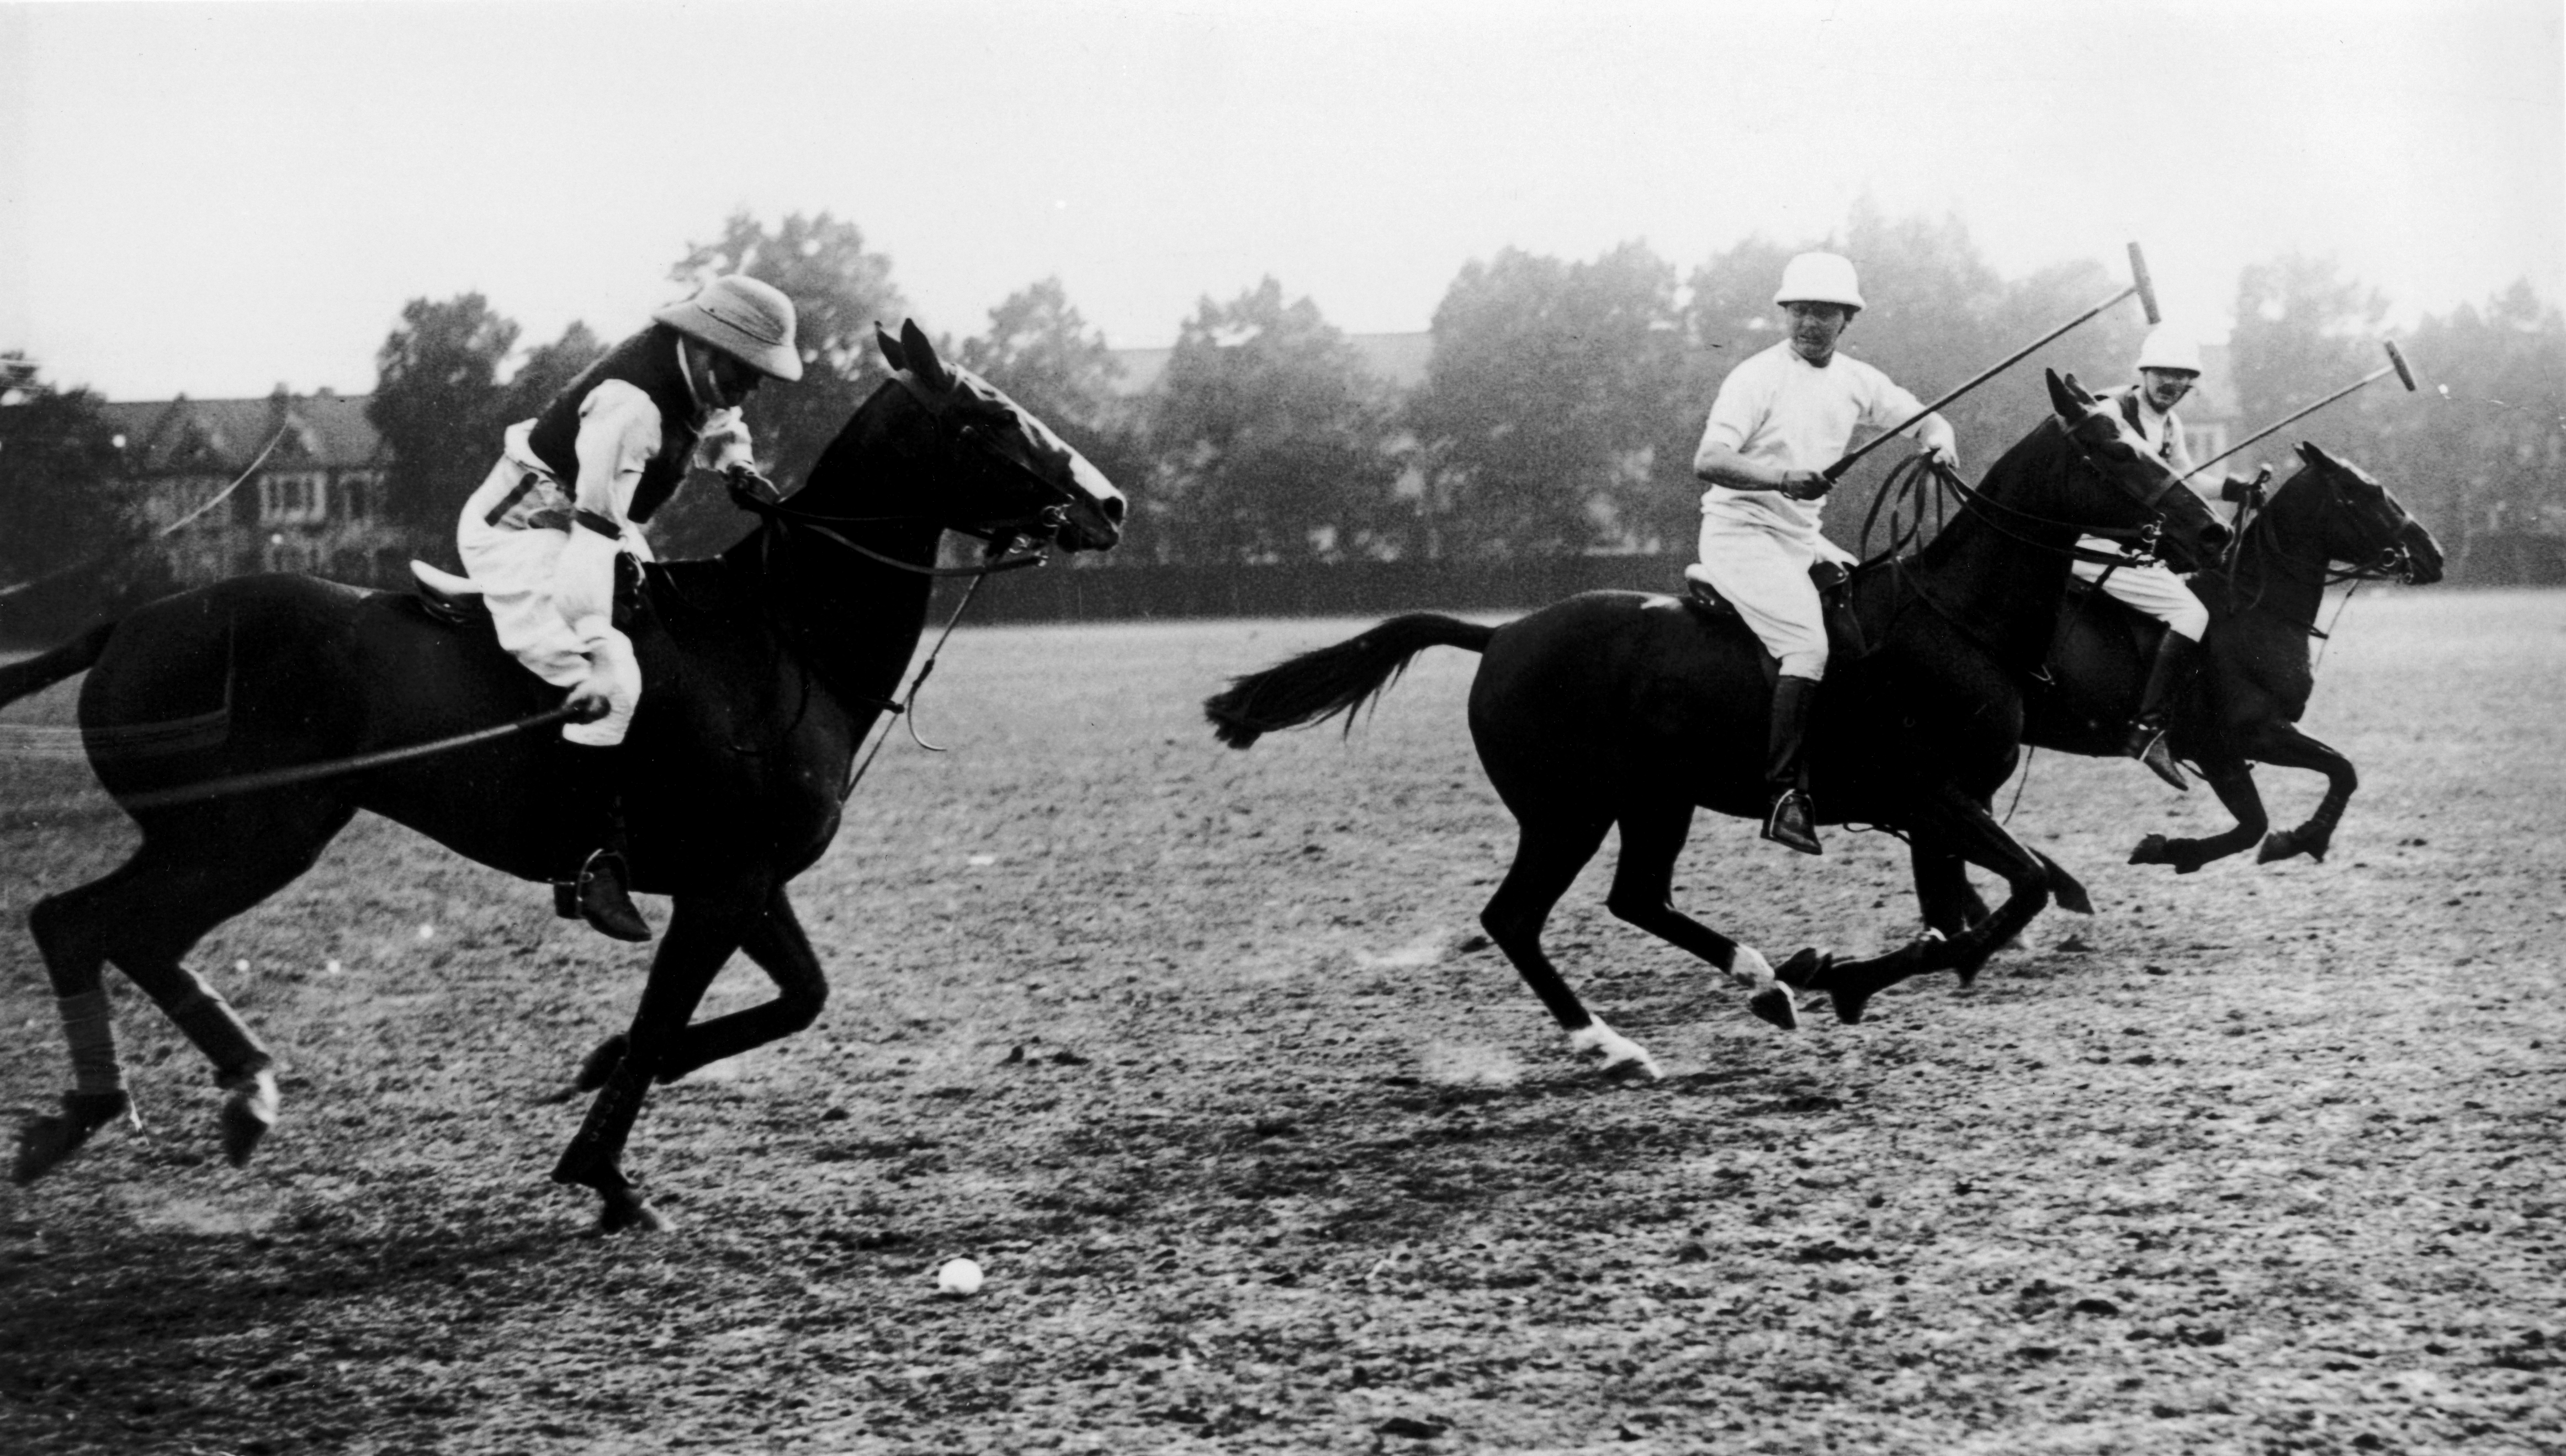 British statesman Winston Churchill (1874 - 1965) on the ball during the annual polo match between the House of Commons and the House of Lords for the Harrington Challenge Cup at Ranelagh, 1925. Churchill's House of Commons team won the match 6-2. (Photo by Hulton Archive/Getty Images)